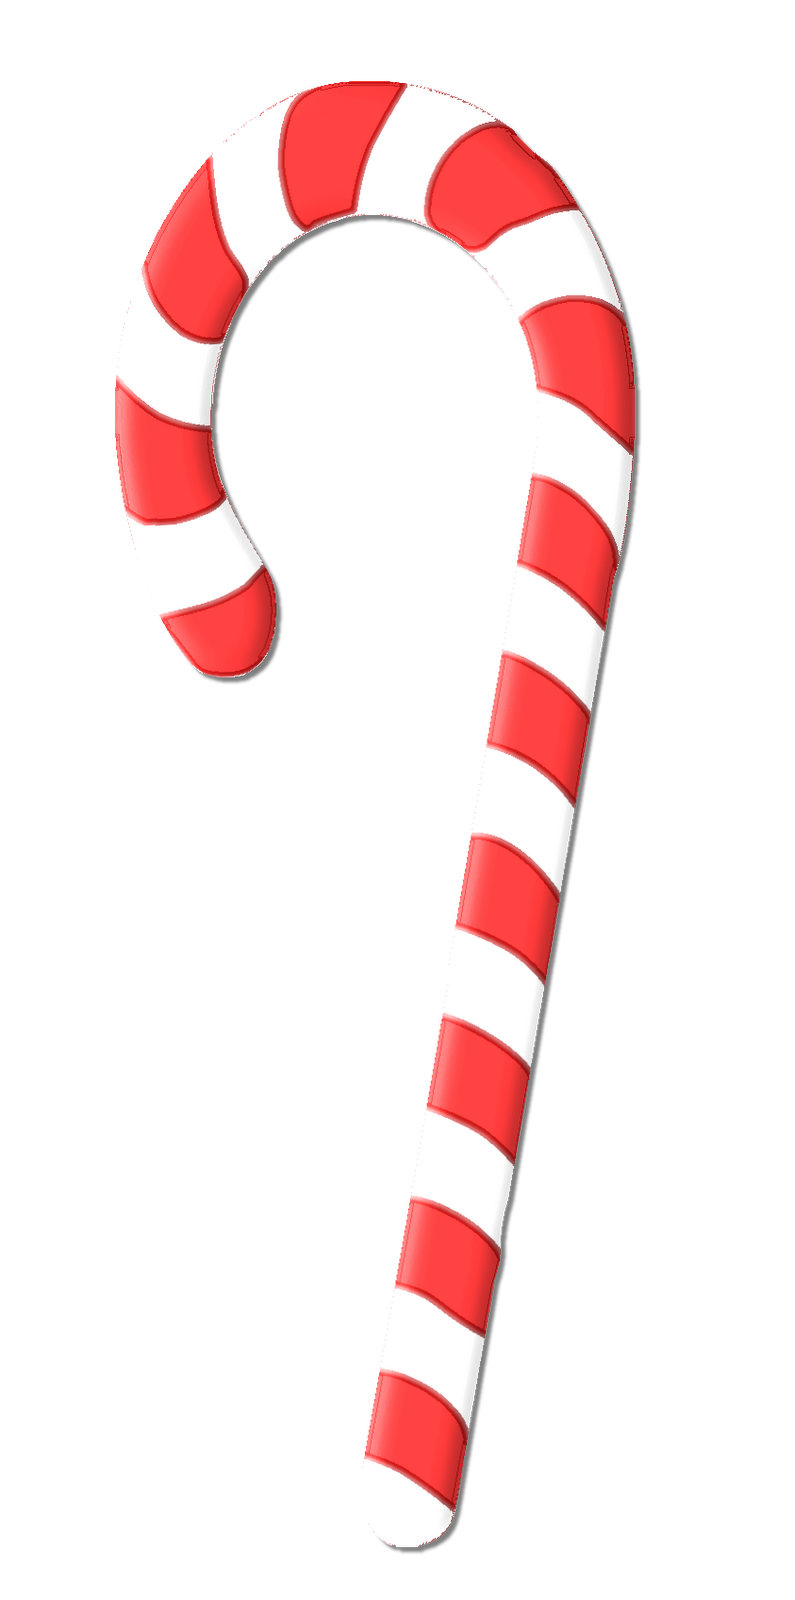 Candy cane Product Font Line - line png download - 795*1600 - Free ...